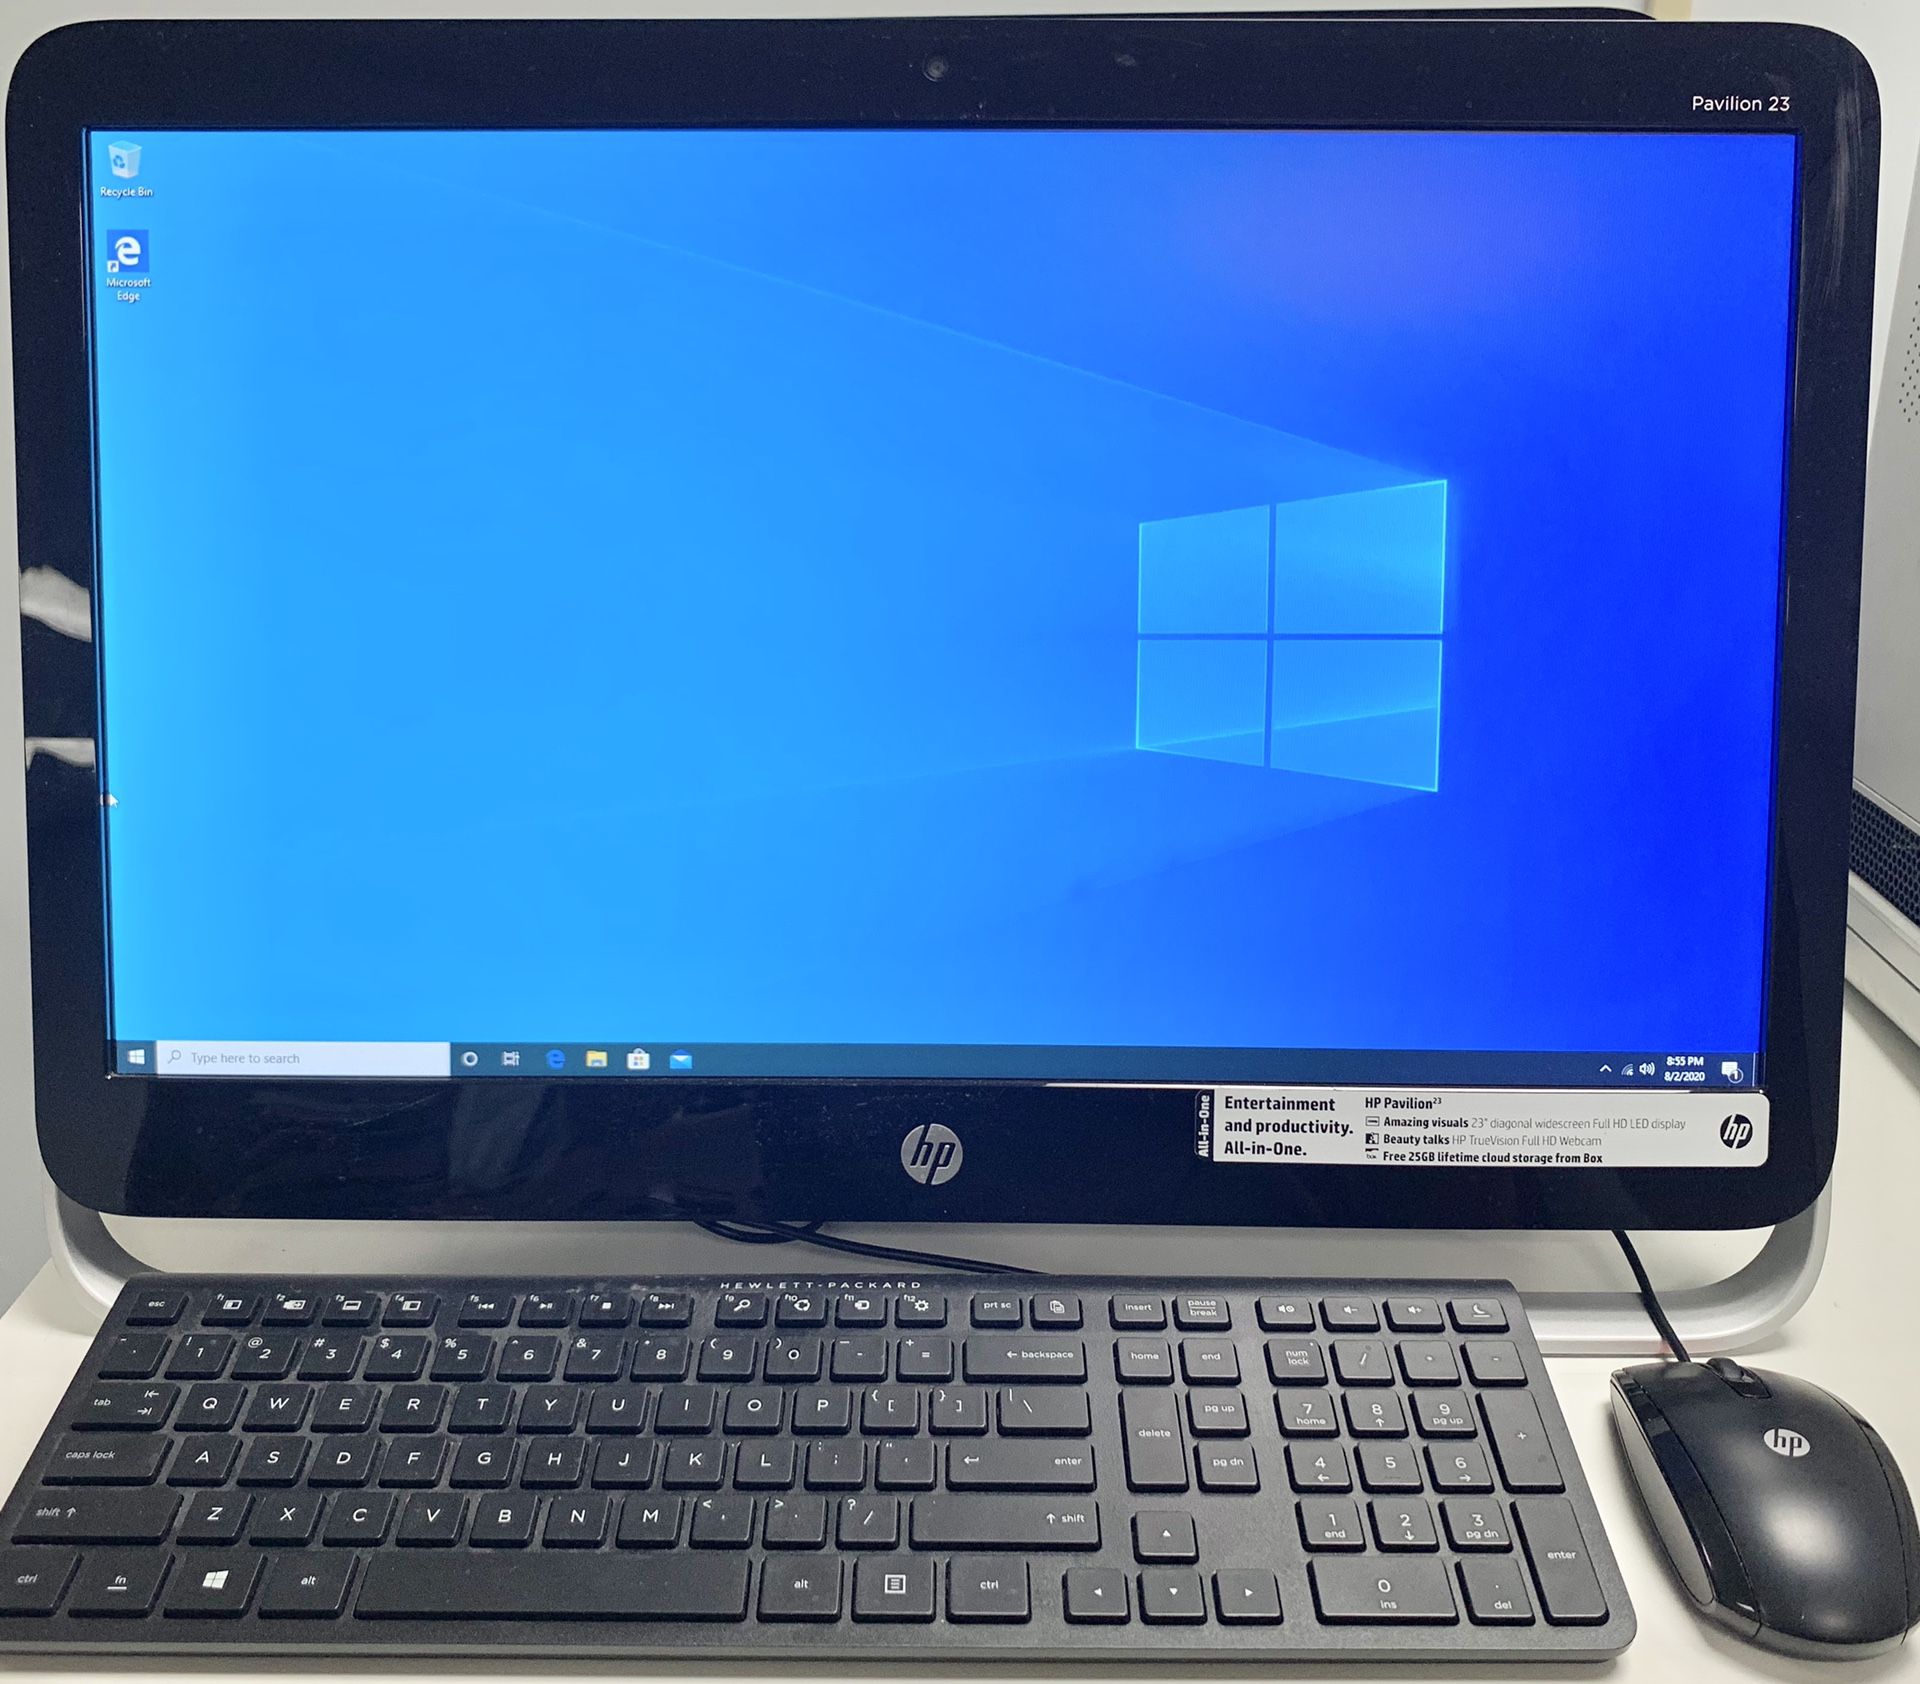 HP Pavilion 23-g010 23” All-In-One DVD AMD E2-3800 Quad Core 1.3 GHz 4GB Ram 500GB HDD Win10Pro MS Office 2019